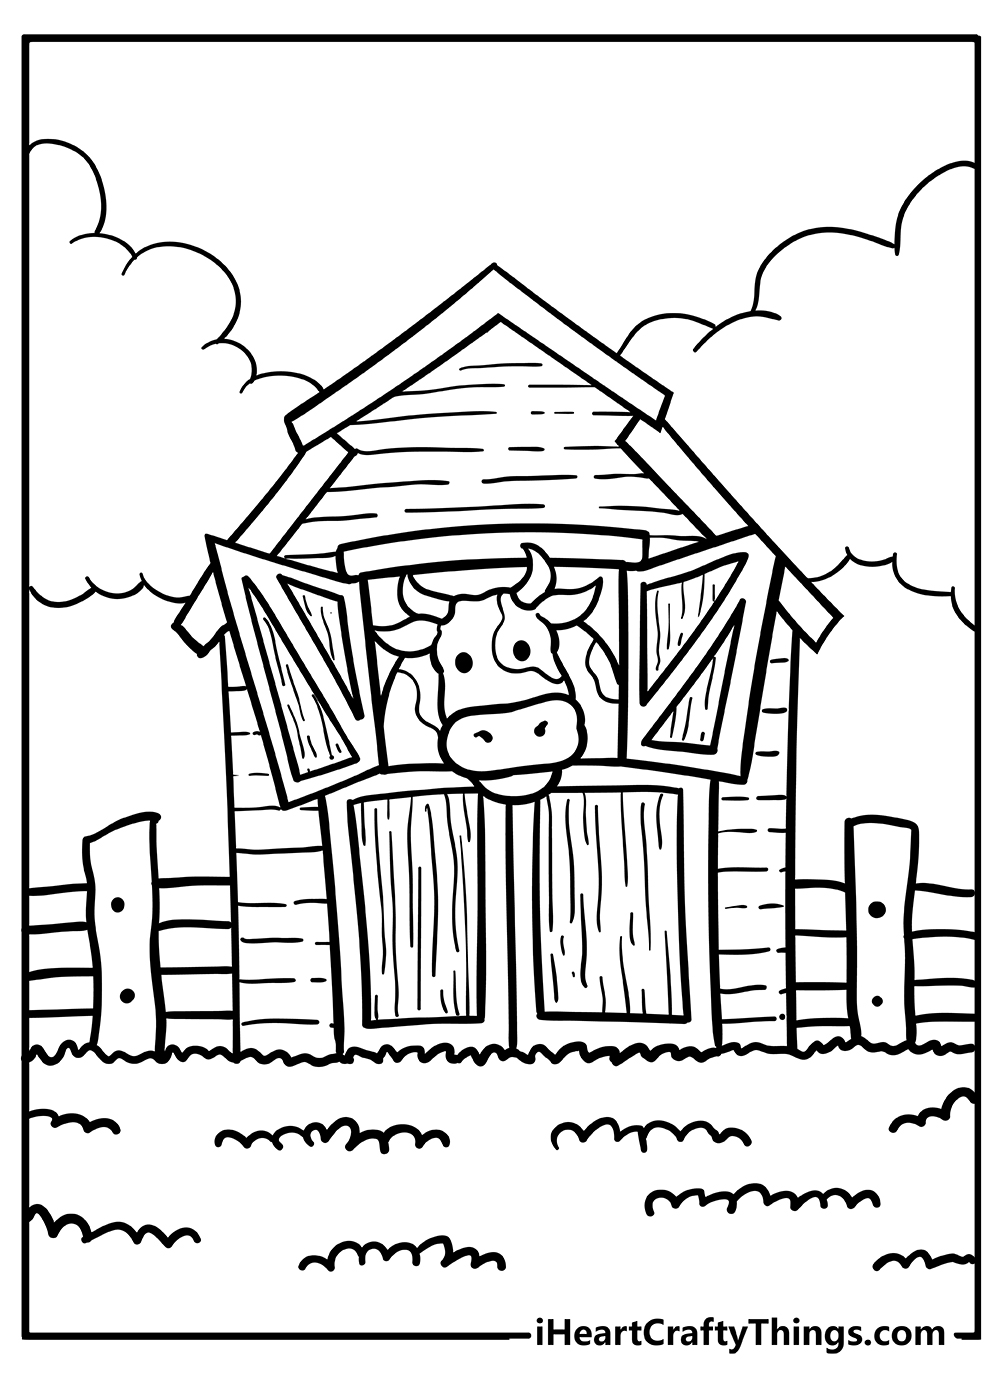 Farm Animal Coloring Pages for preschoolers free printable